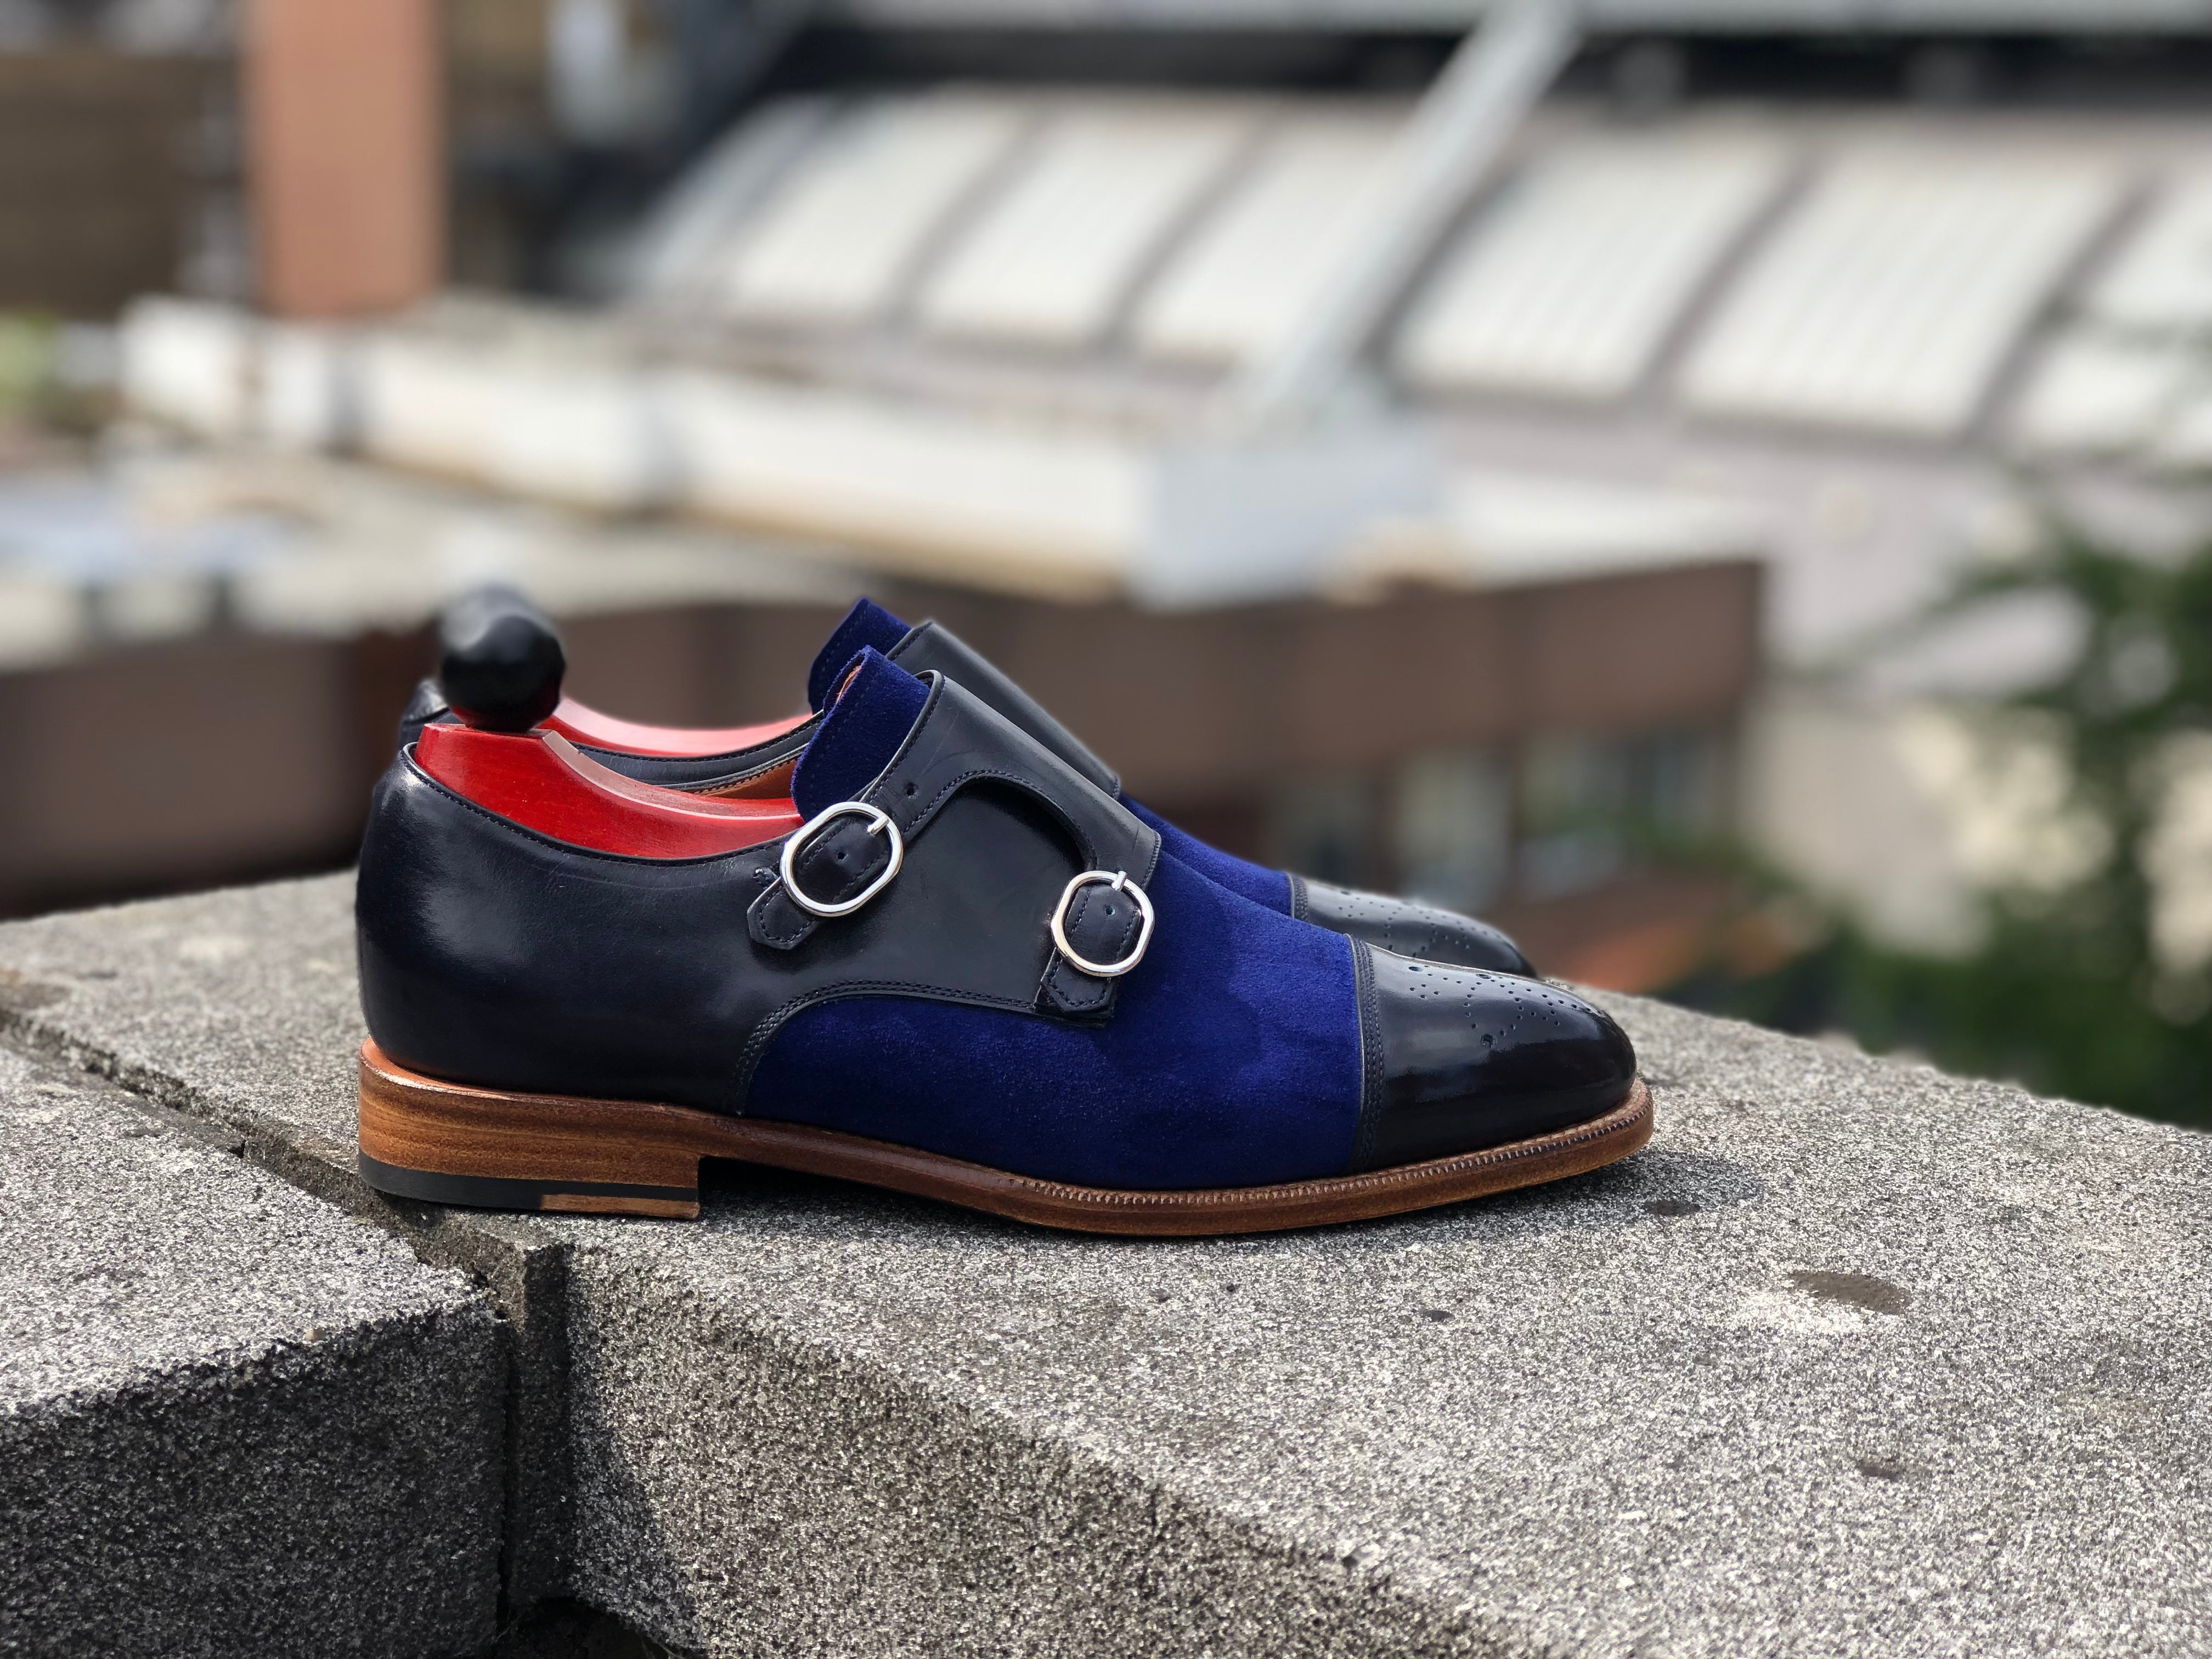 Kent - MTO - Navy Calf / Blue Suede - TMG Last - Natural Leather Sole